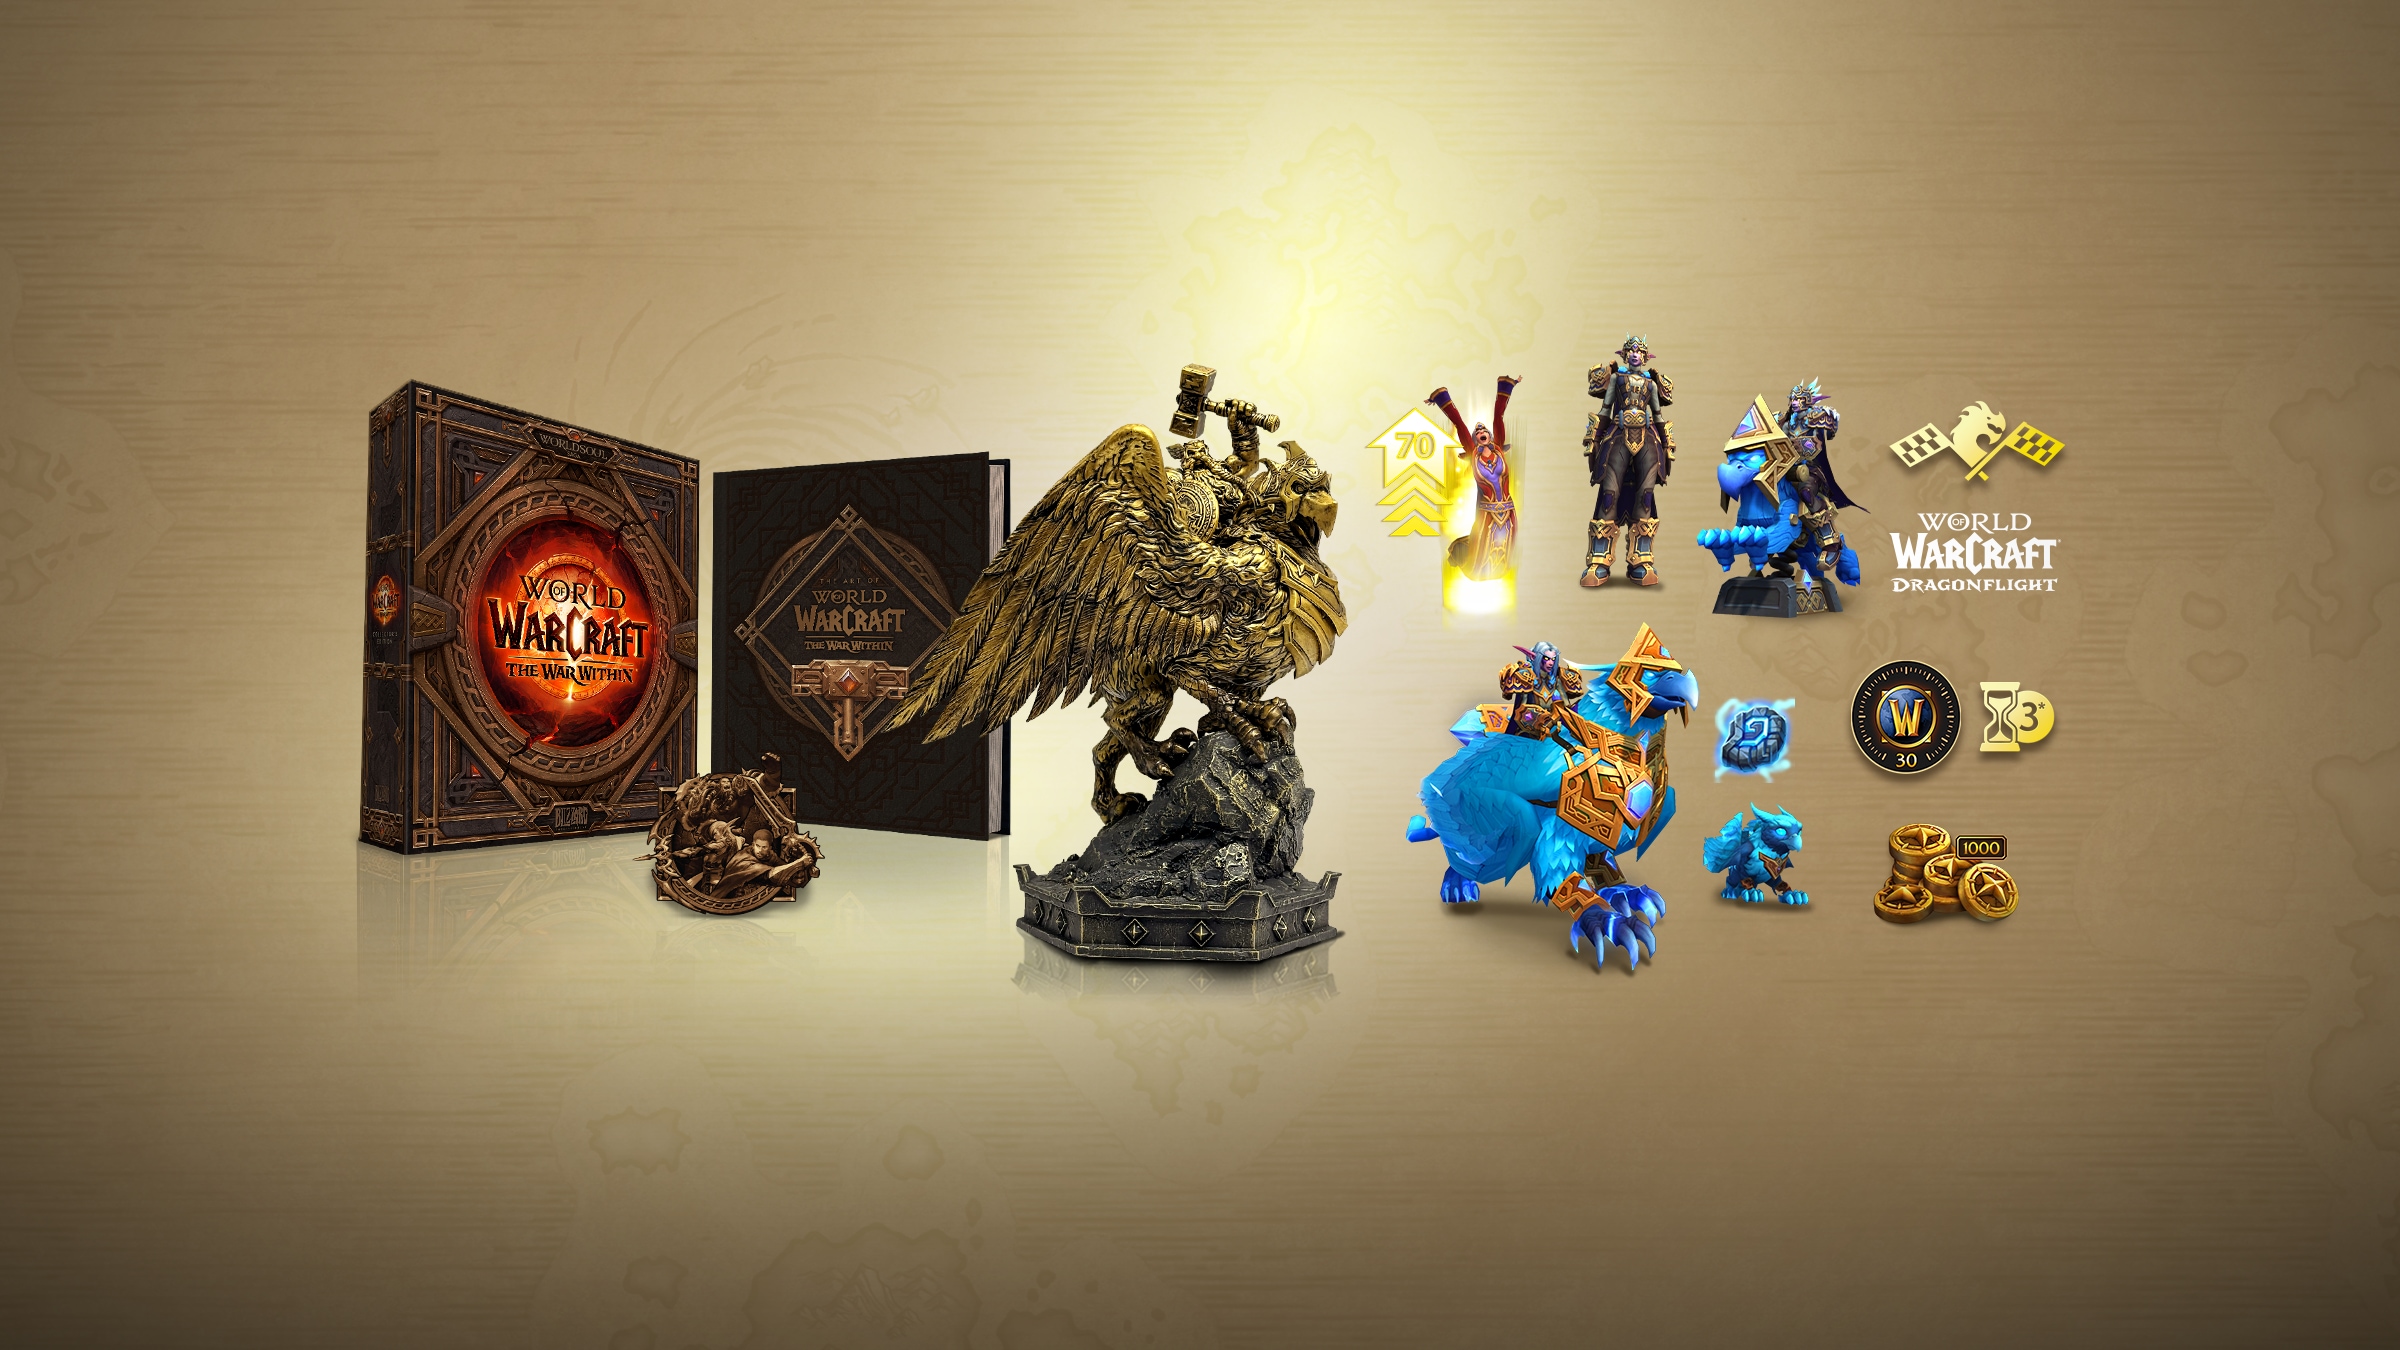 Preacquista World of Warcraft®: The War Within™ 20th Anniversary Collector's Edition